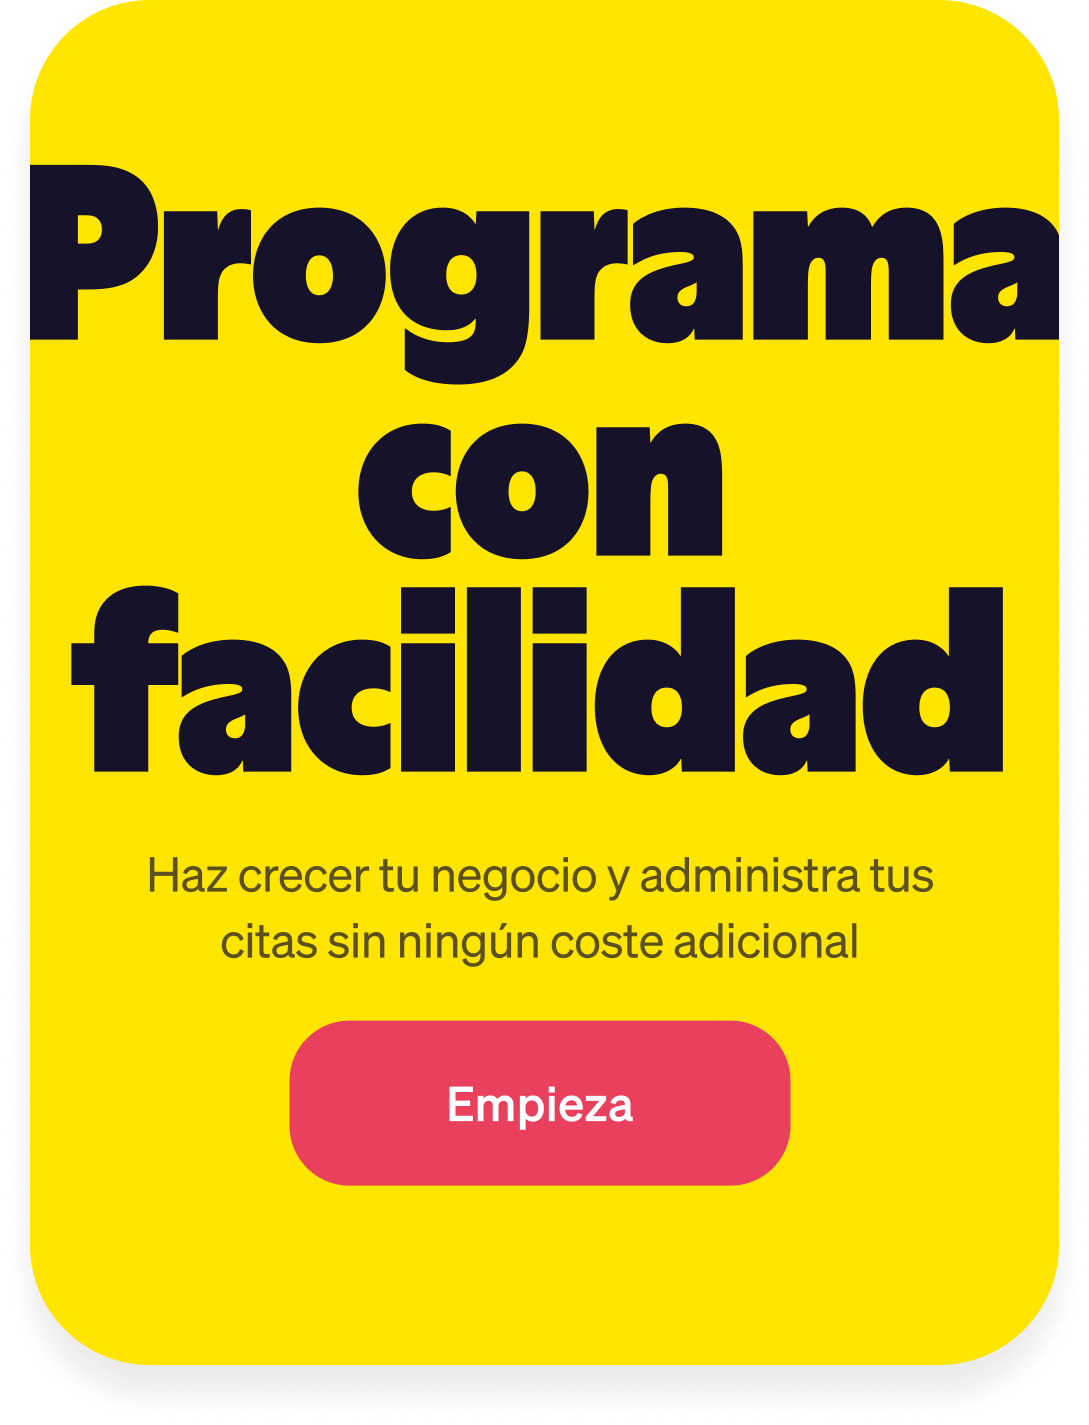 call-to-action-mobile-spanish